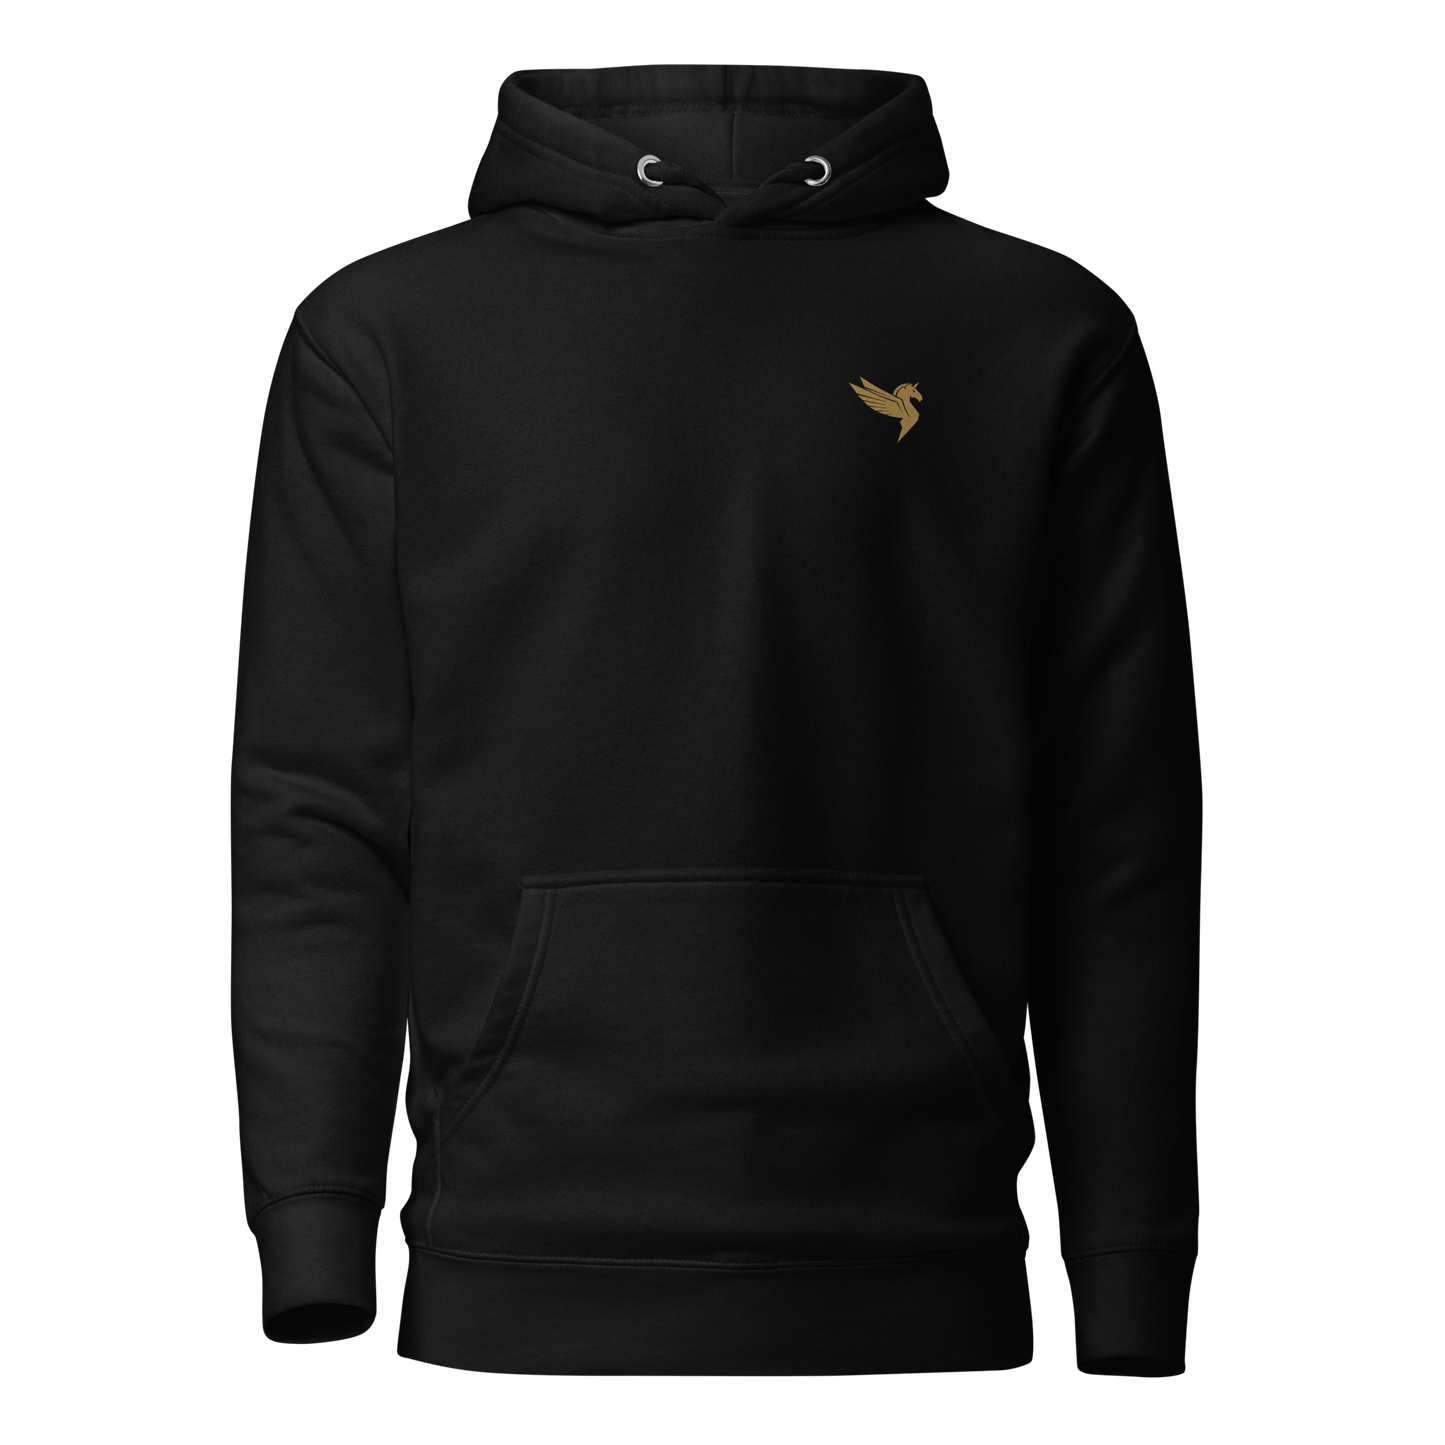 Legends of 6 Lifestyle Hoodie